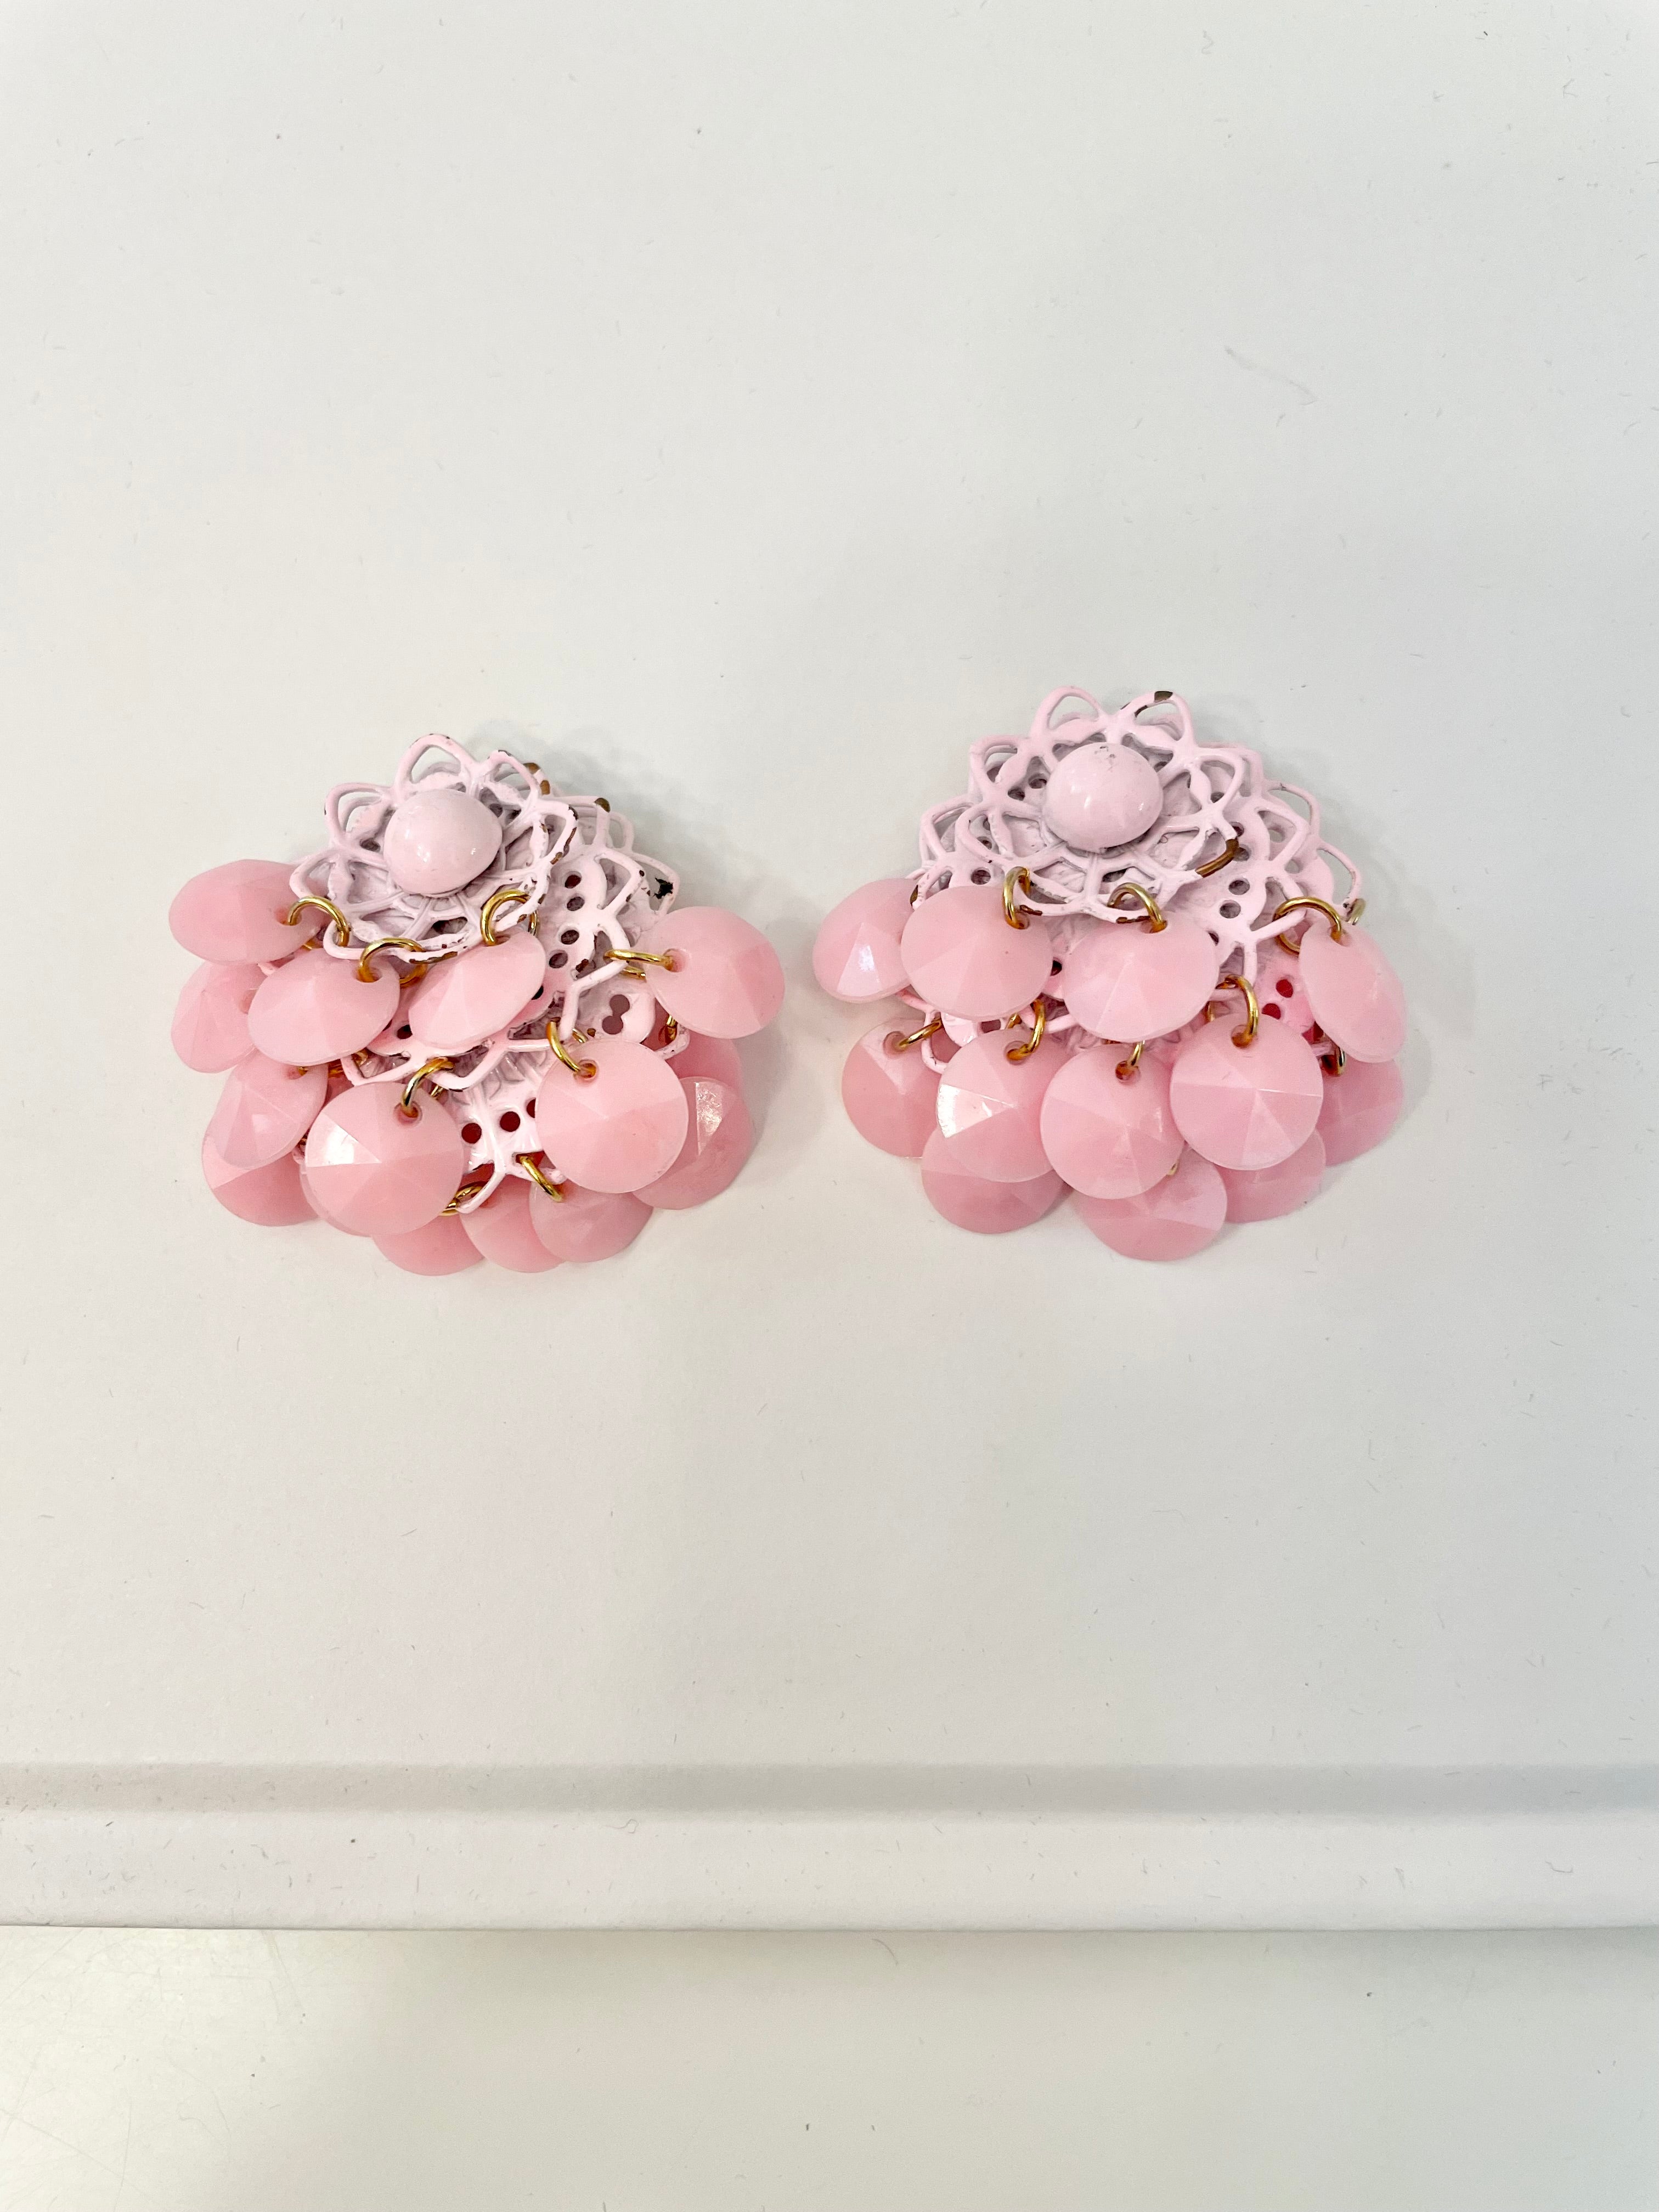 The Flirty gal and her pretty pink earrings! These are so feminine!